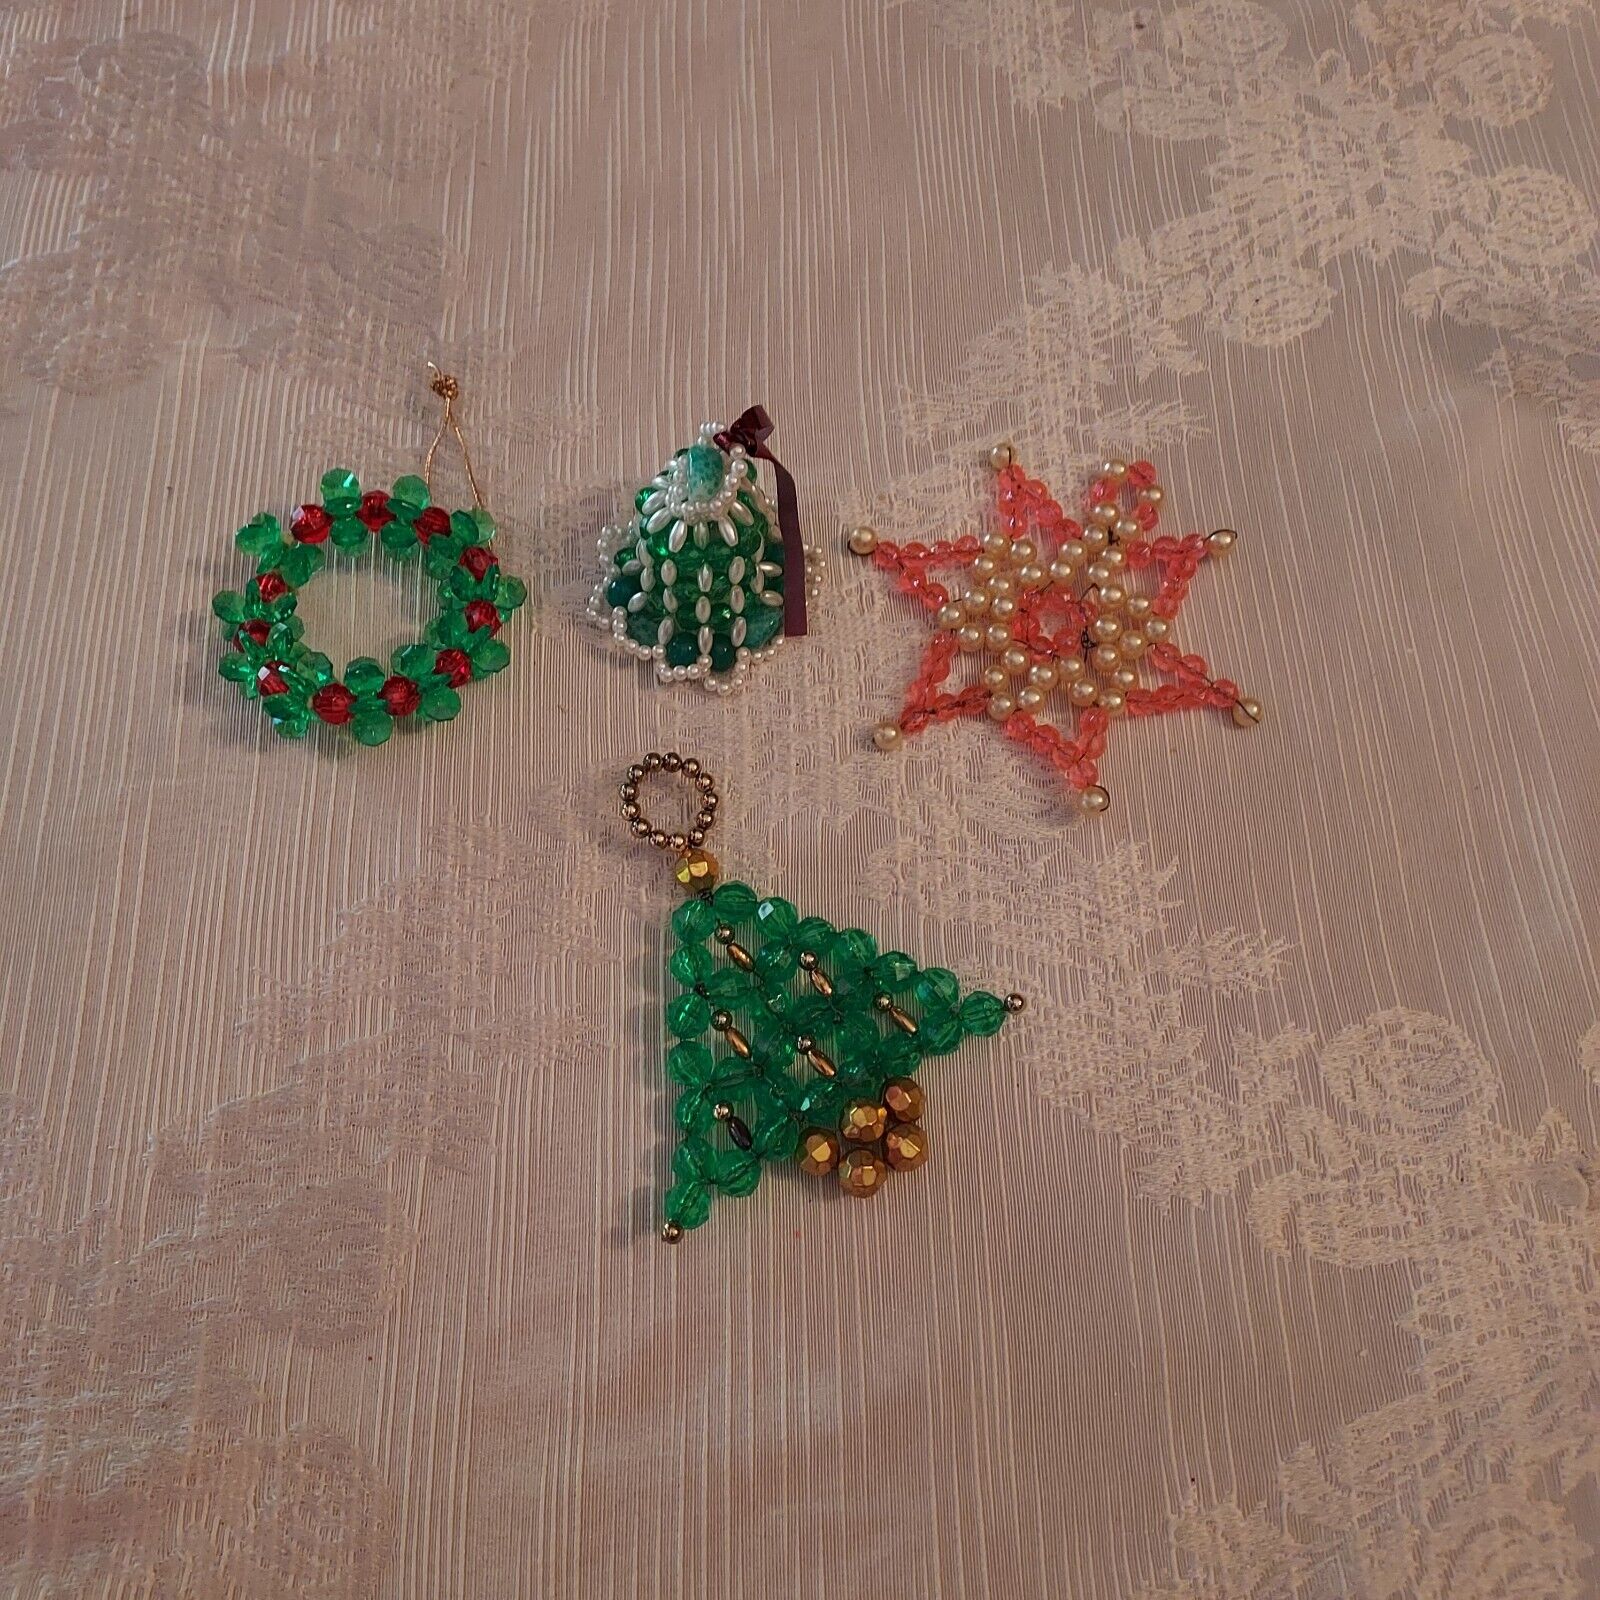 Vintage Handmade Beaded and Some Stone Christmas Ornaments BEAUTIFUL